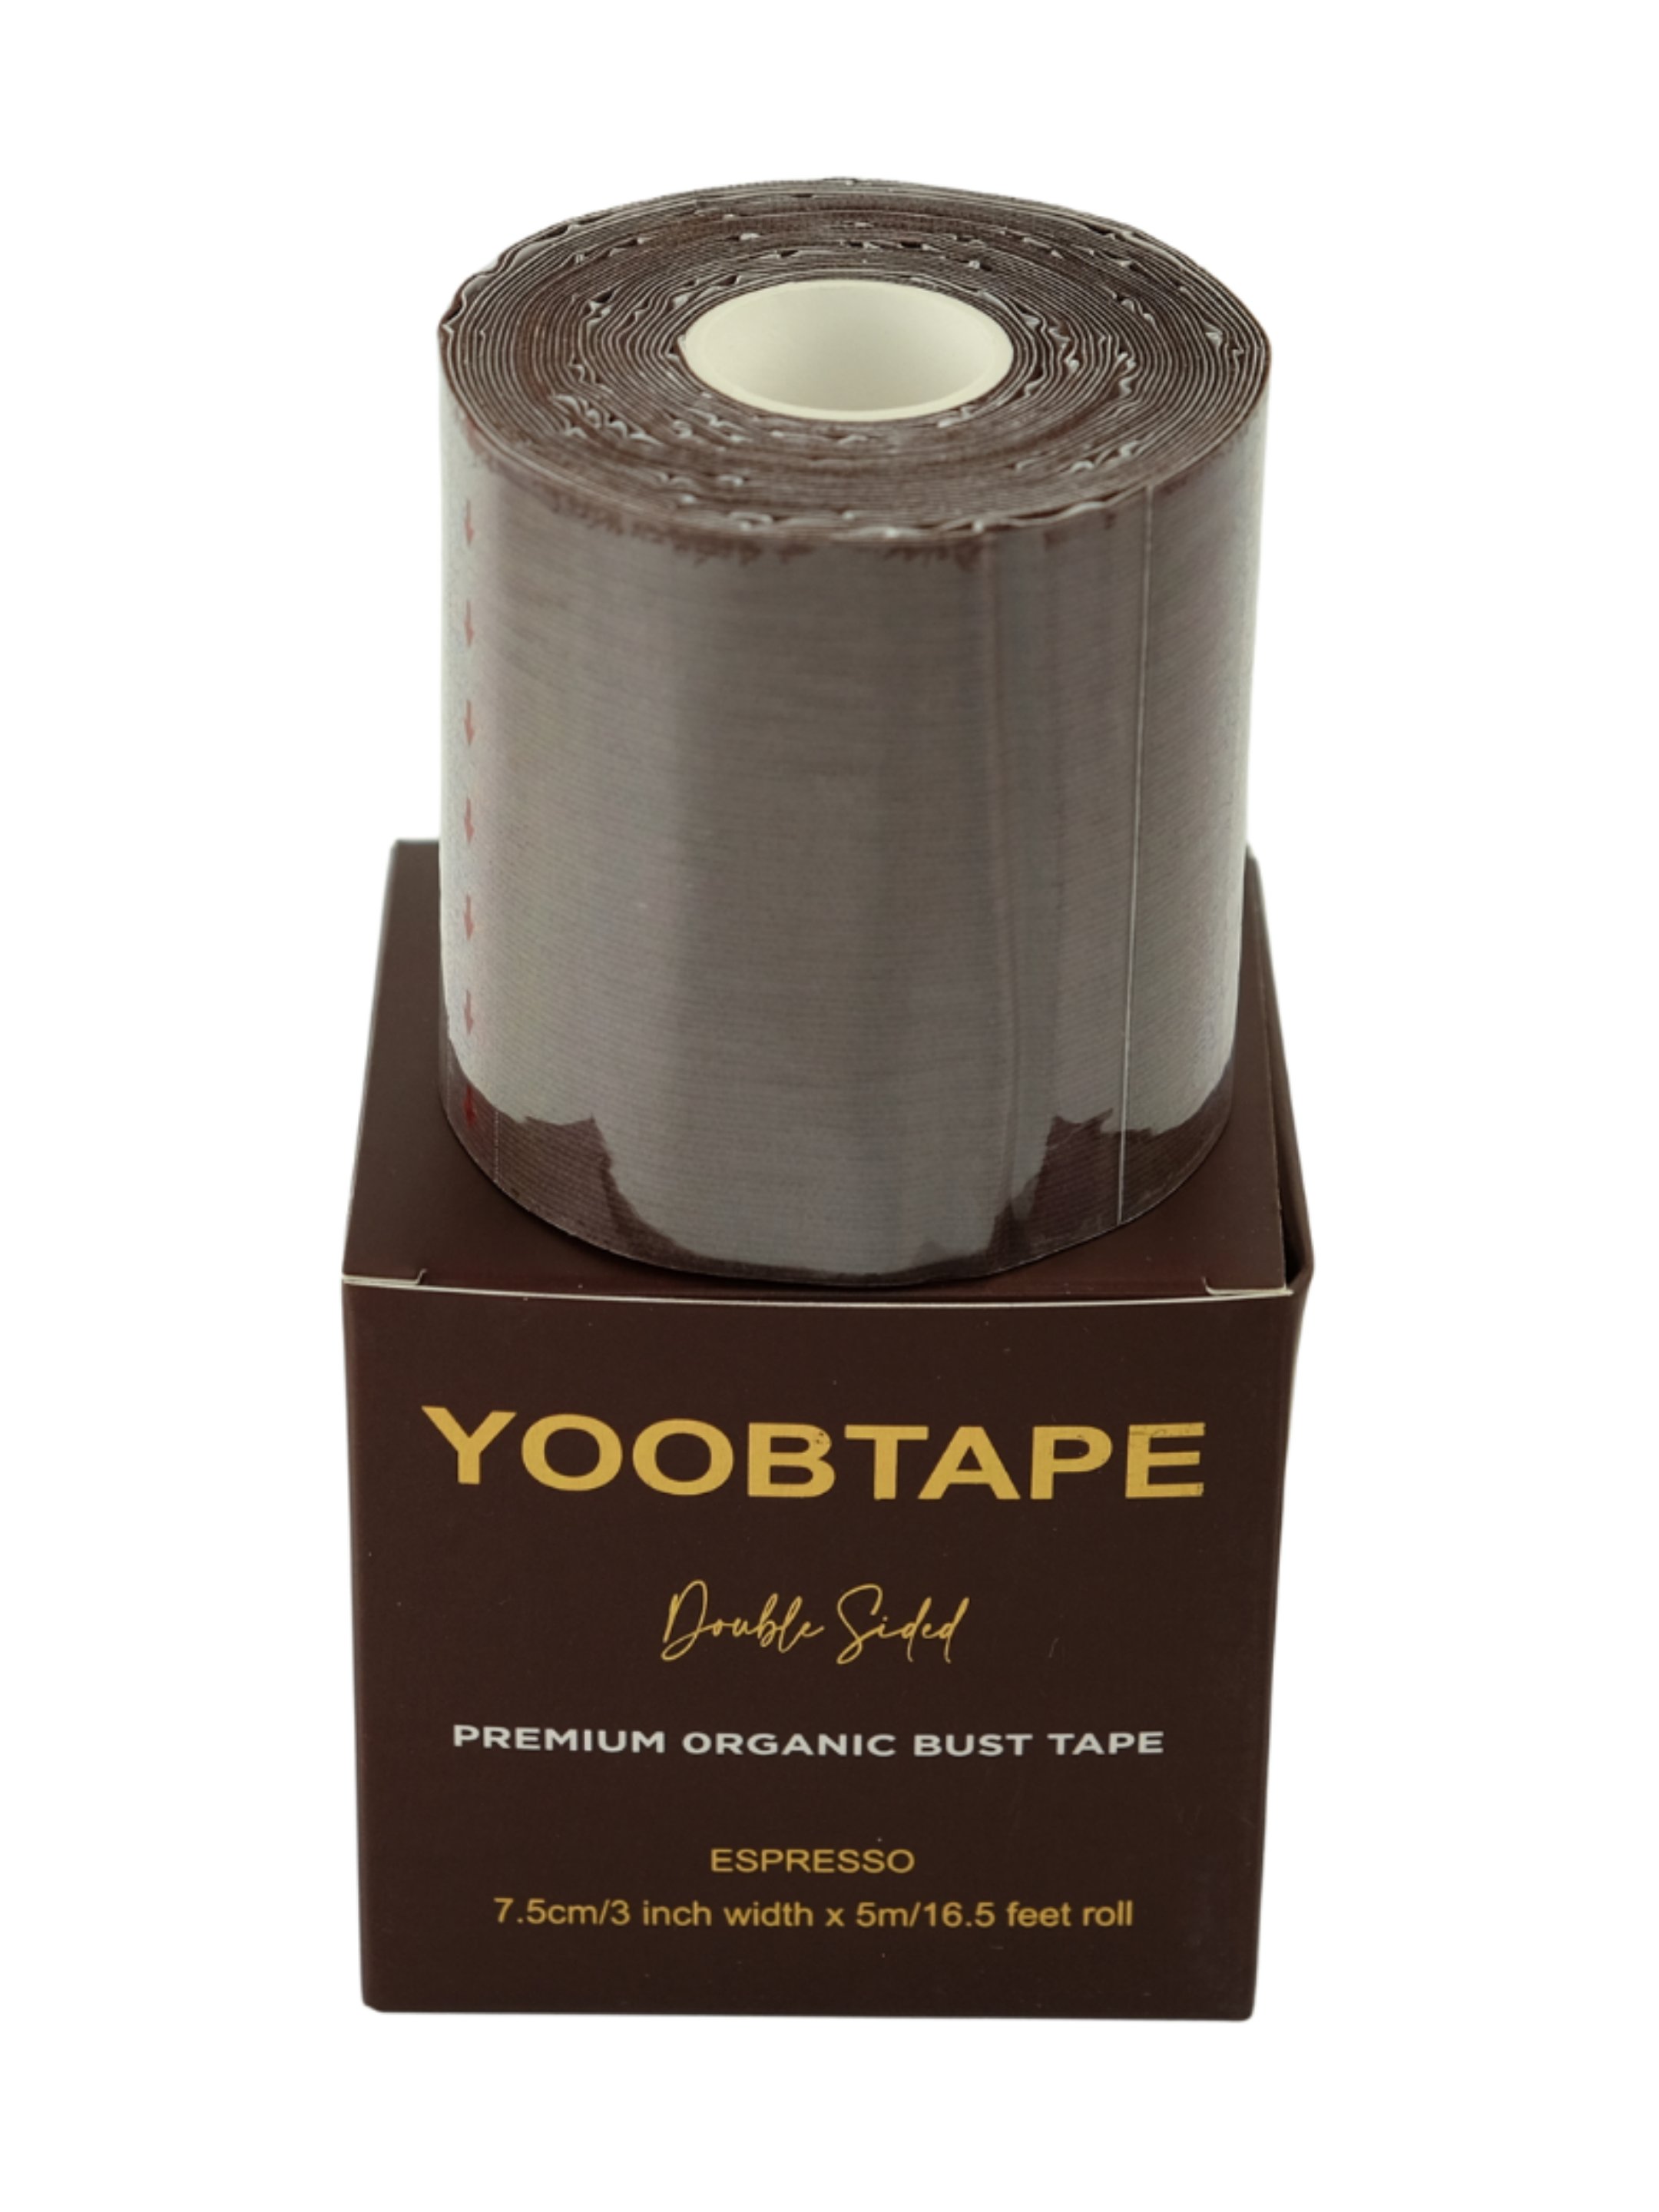 YOOBTAPE Premium Double Sided Bust Tape - Espresso